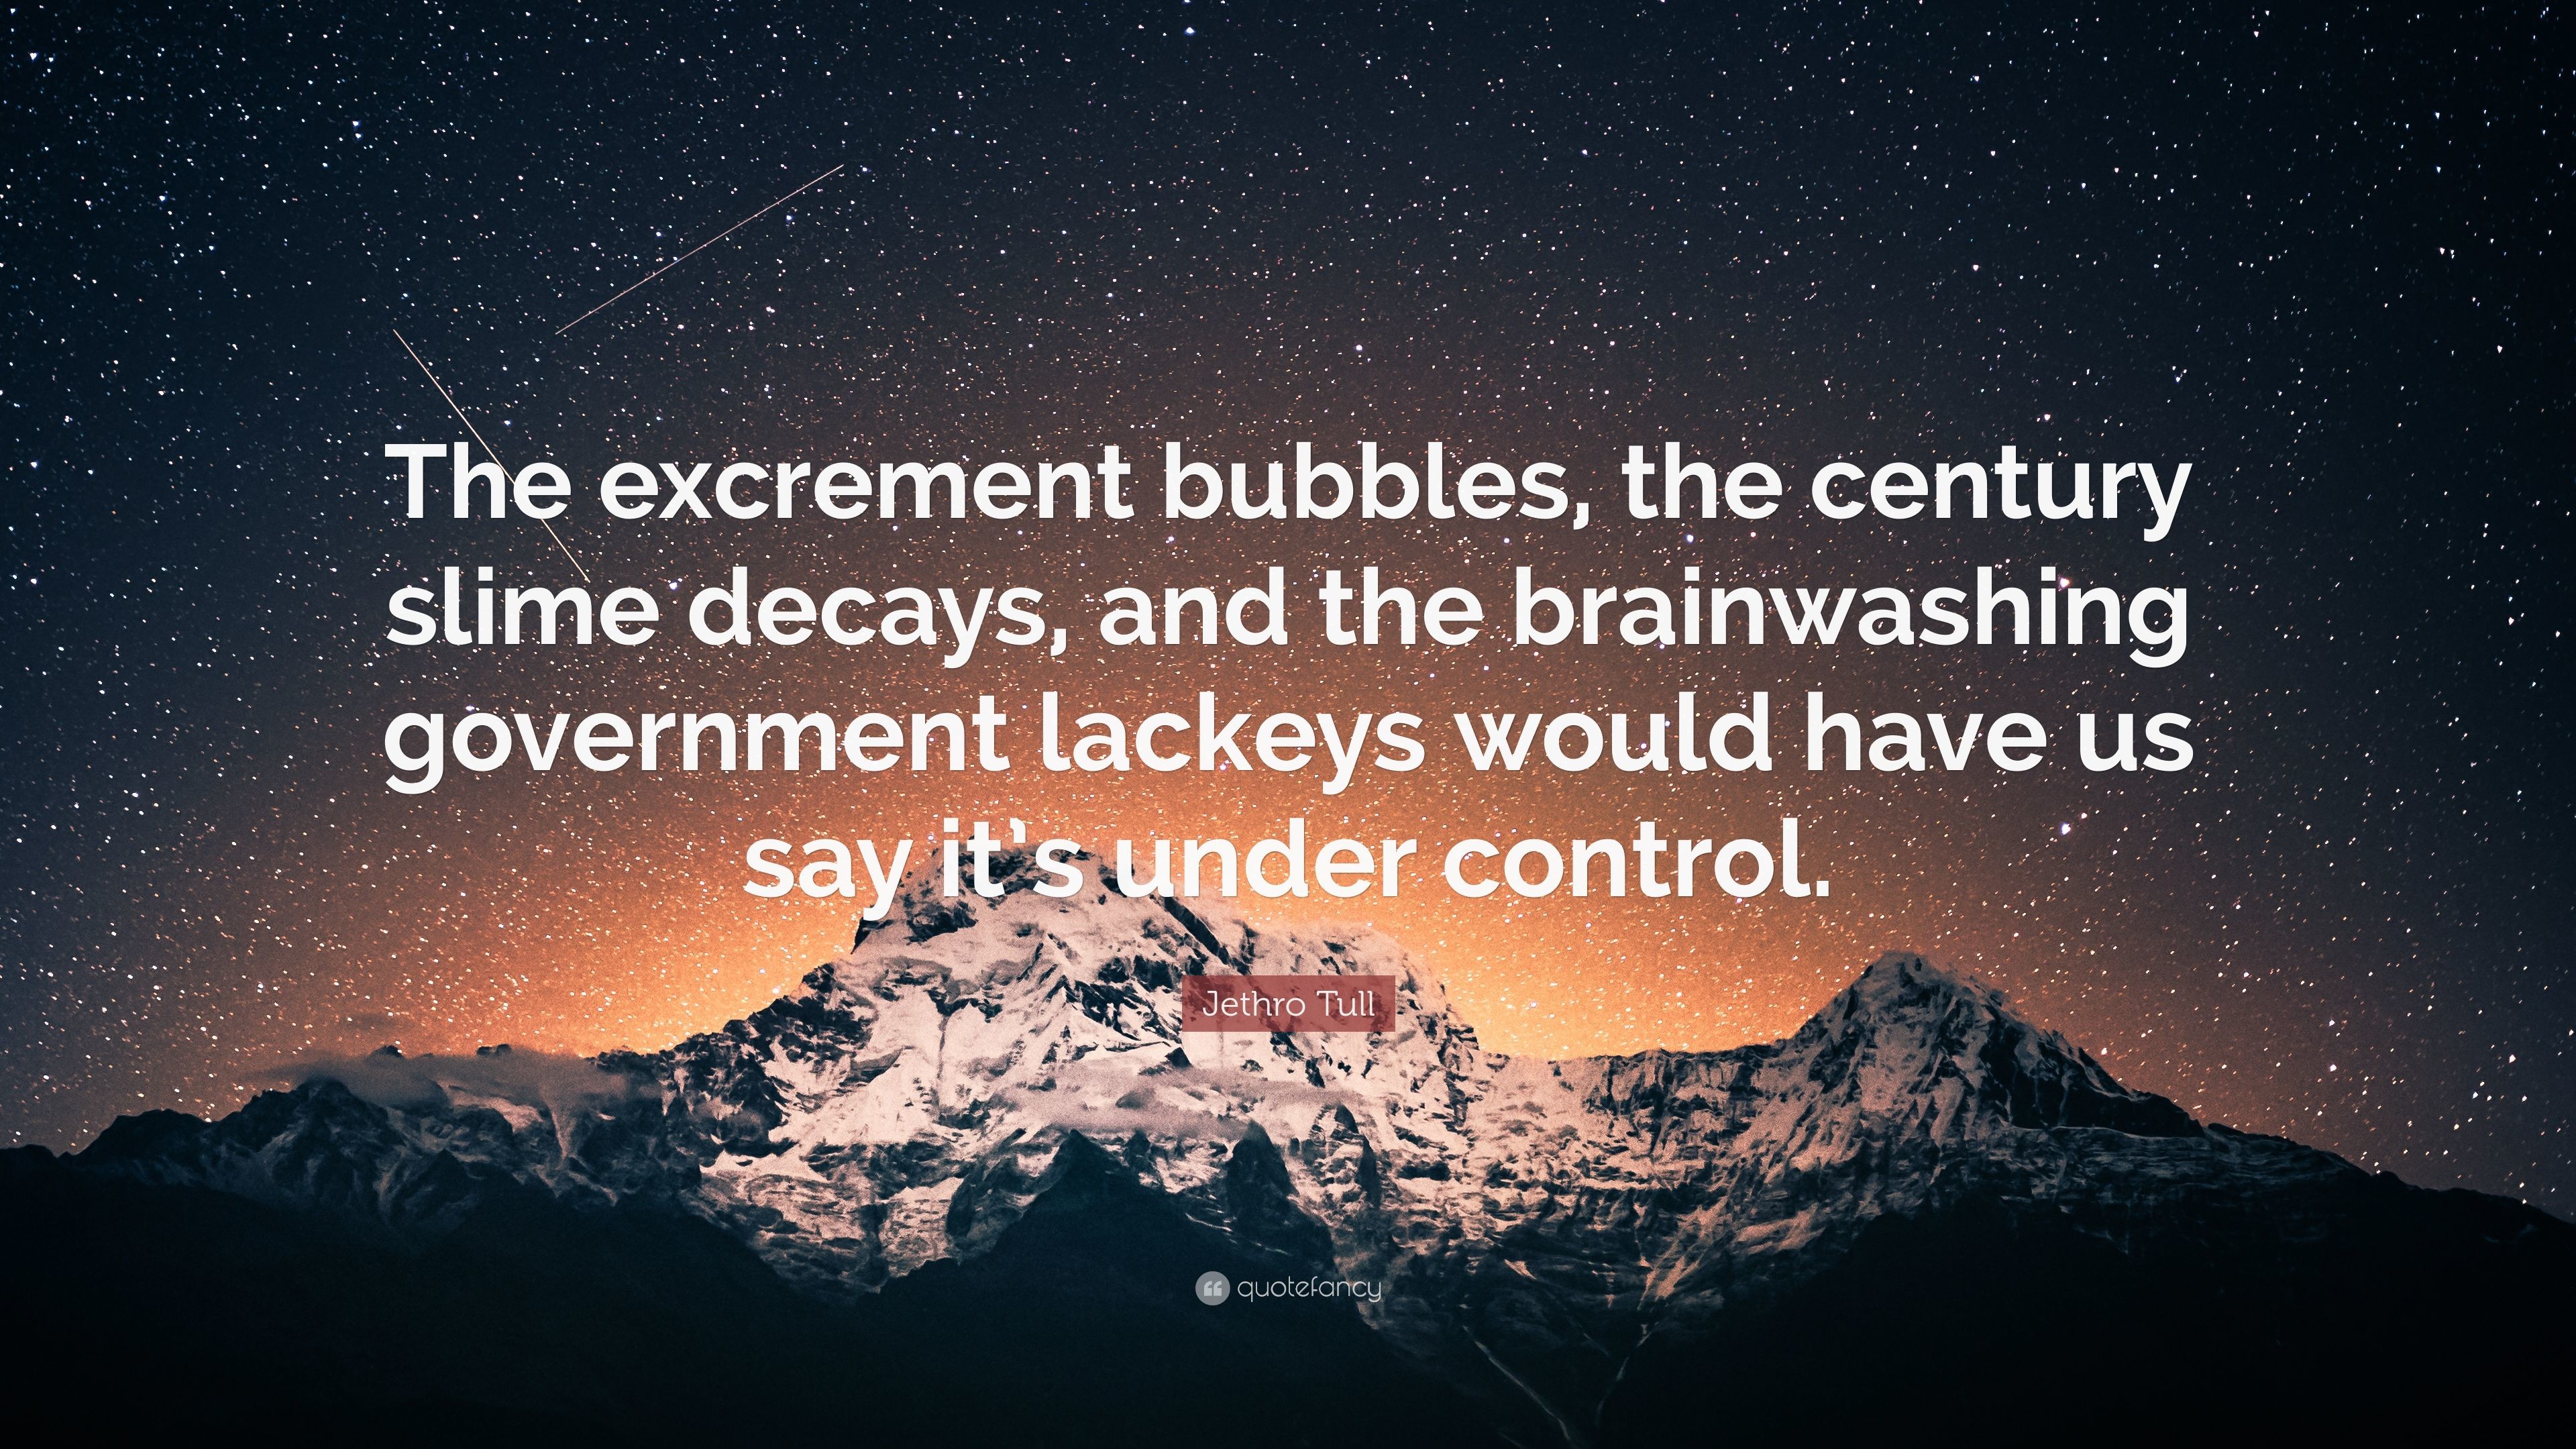 3840x2160 Jethro Tull Quote: “The excrement bubbles, the century slime decays, and the